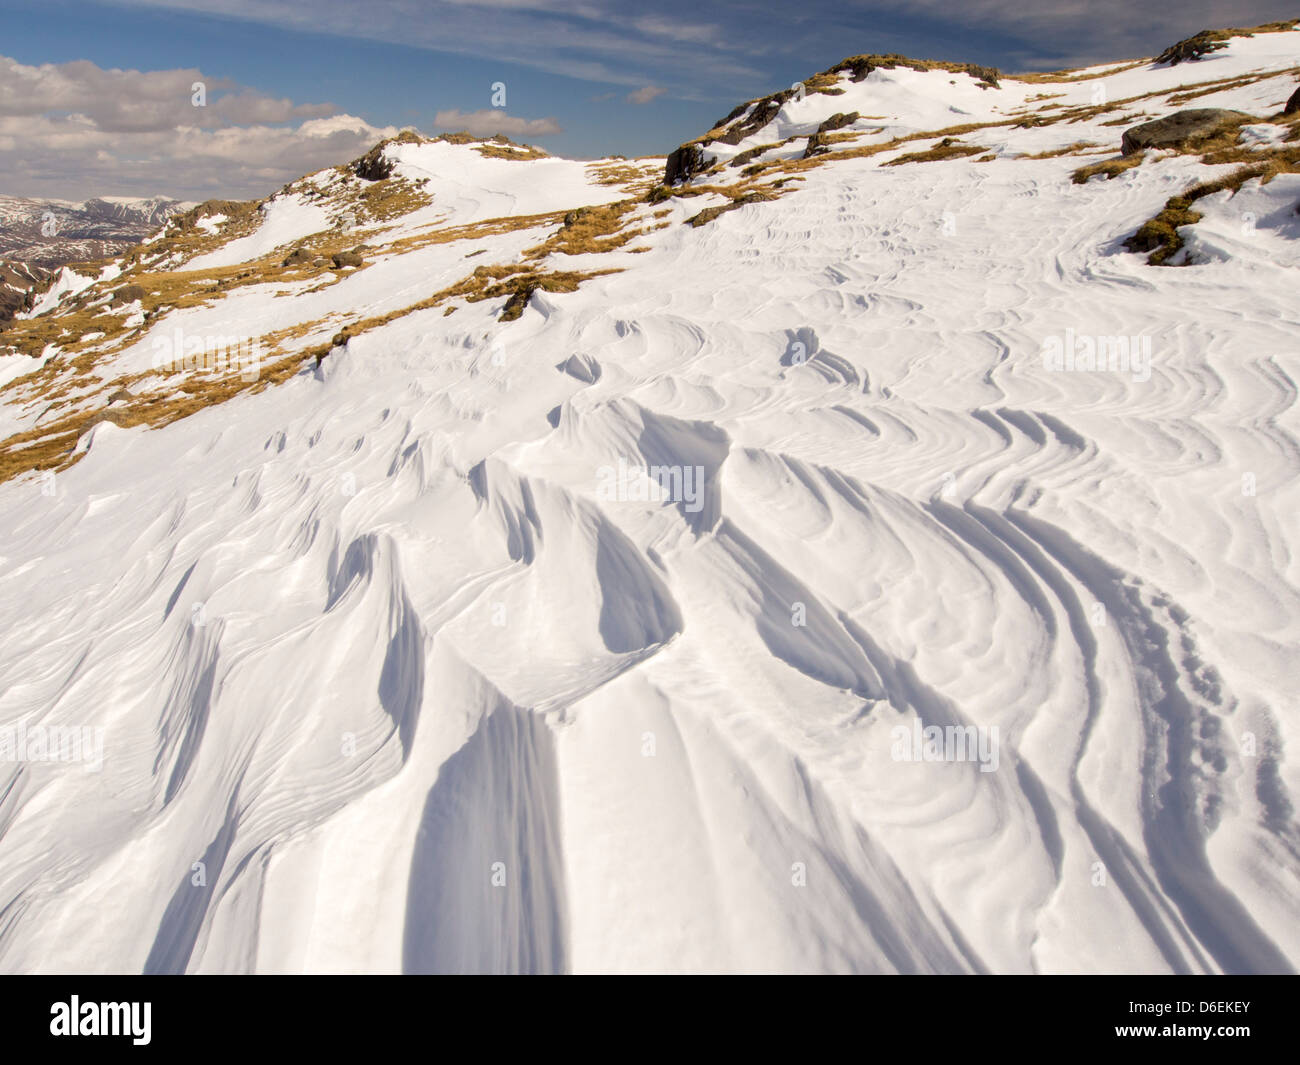 Sastrui caused by wind scour on snow, above Wrynose Pass in the Lake District, UK. Stock Photo